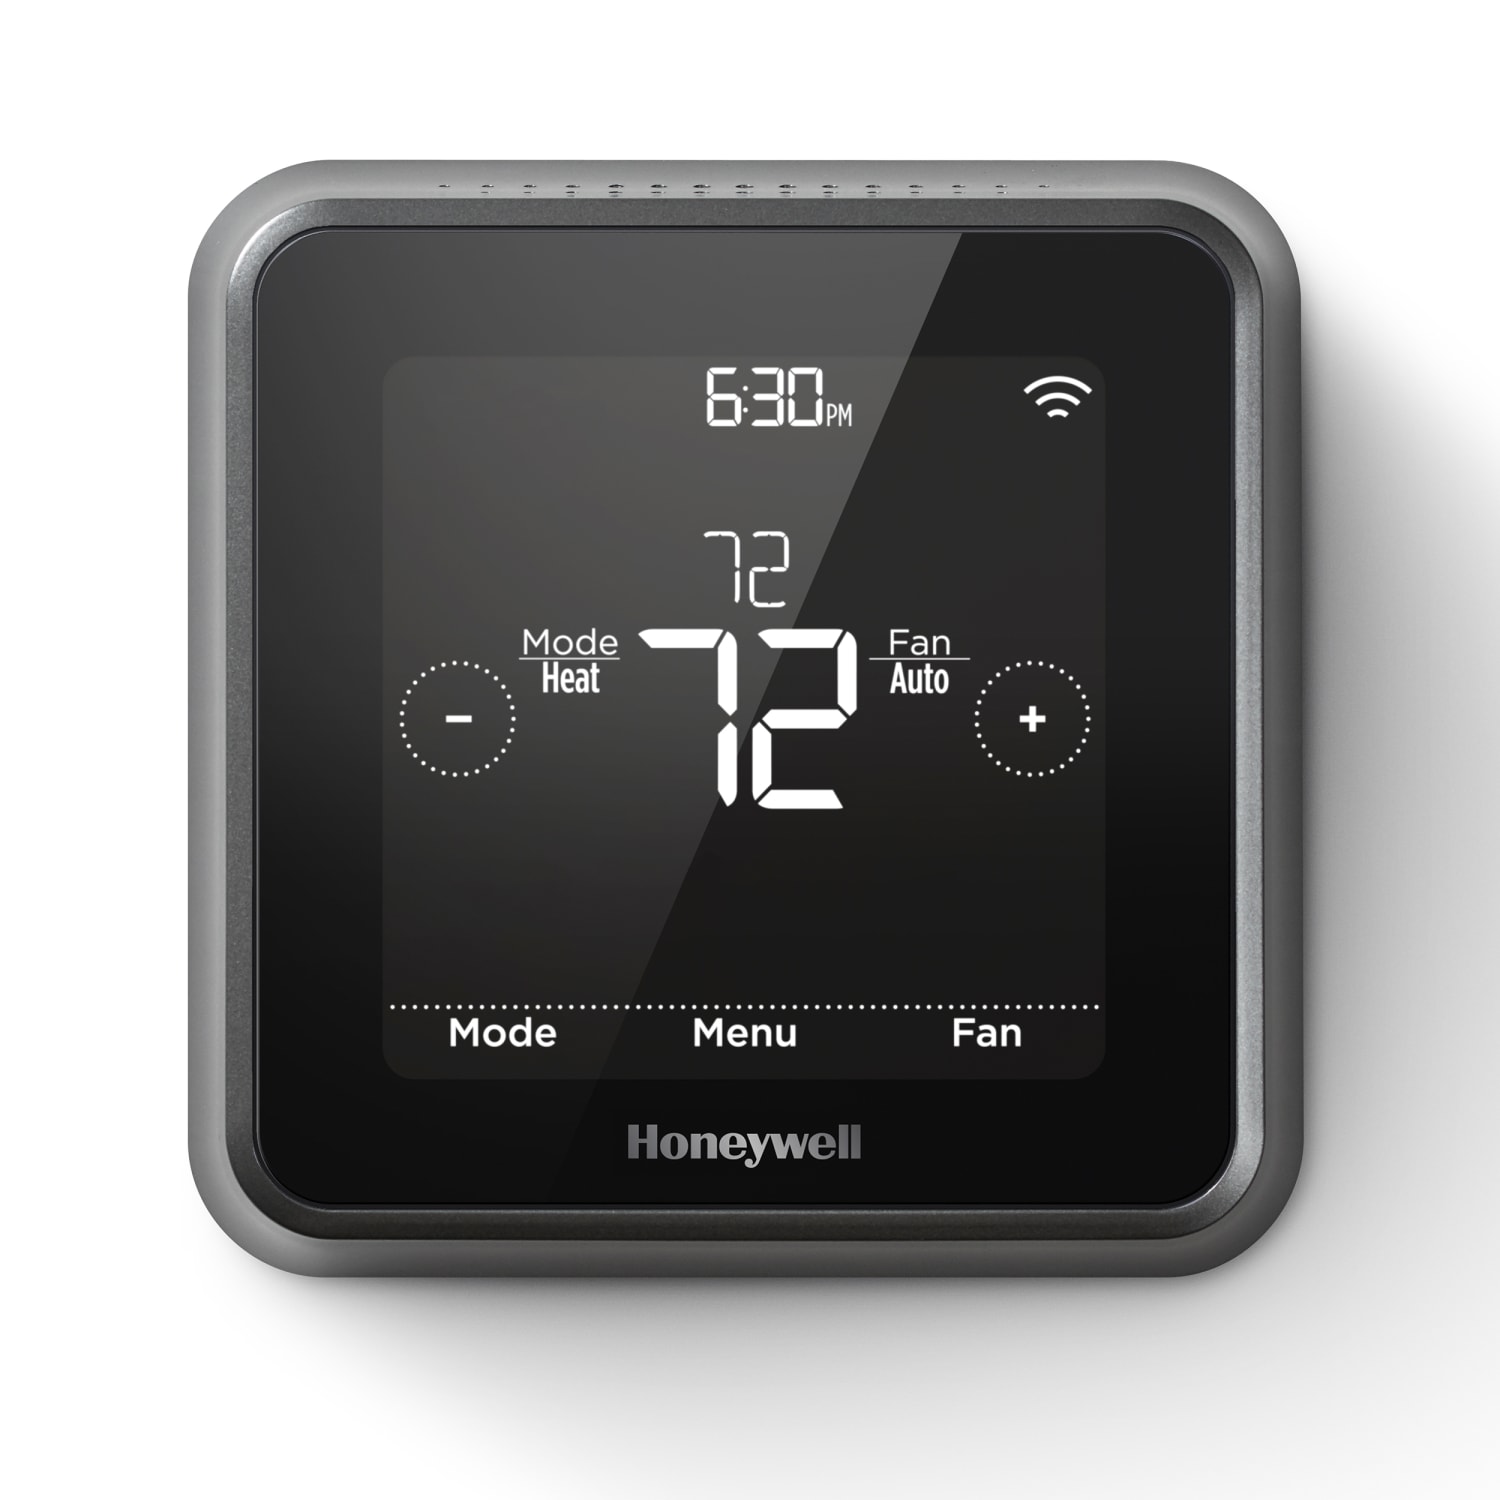 How To Unlock Nv Energy Thermostat A thermostat override can be